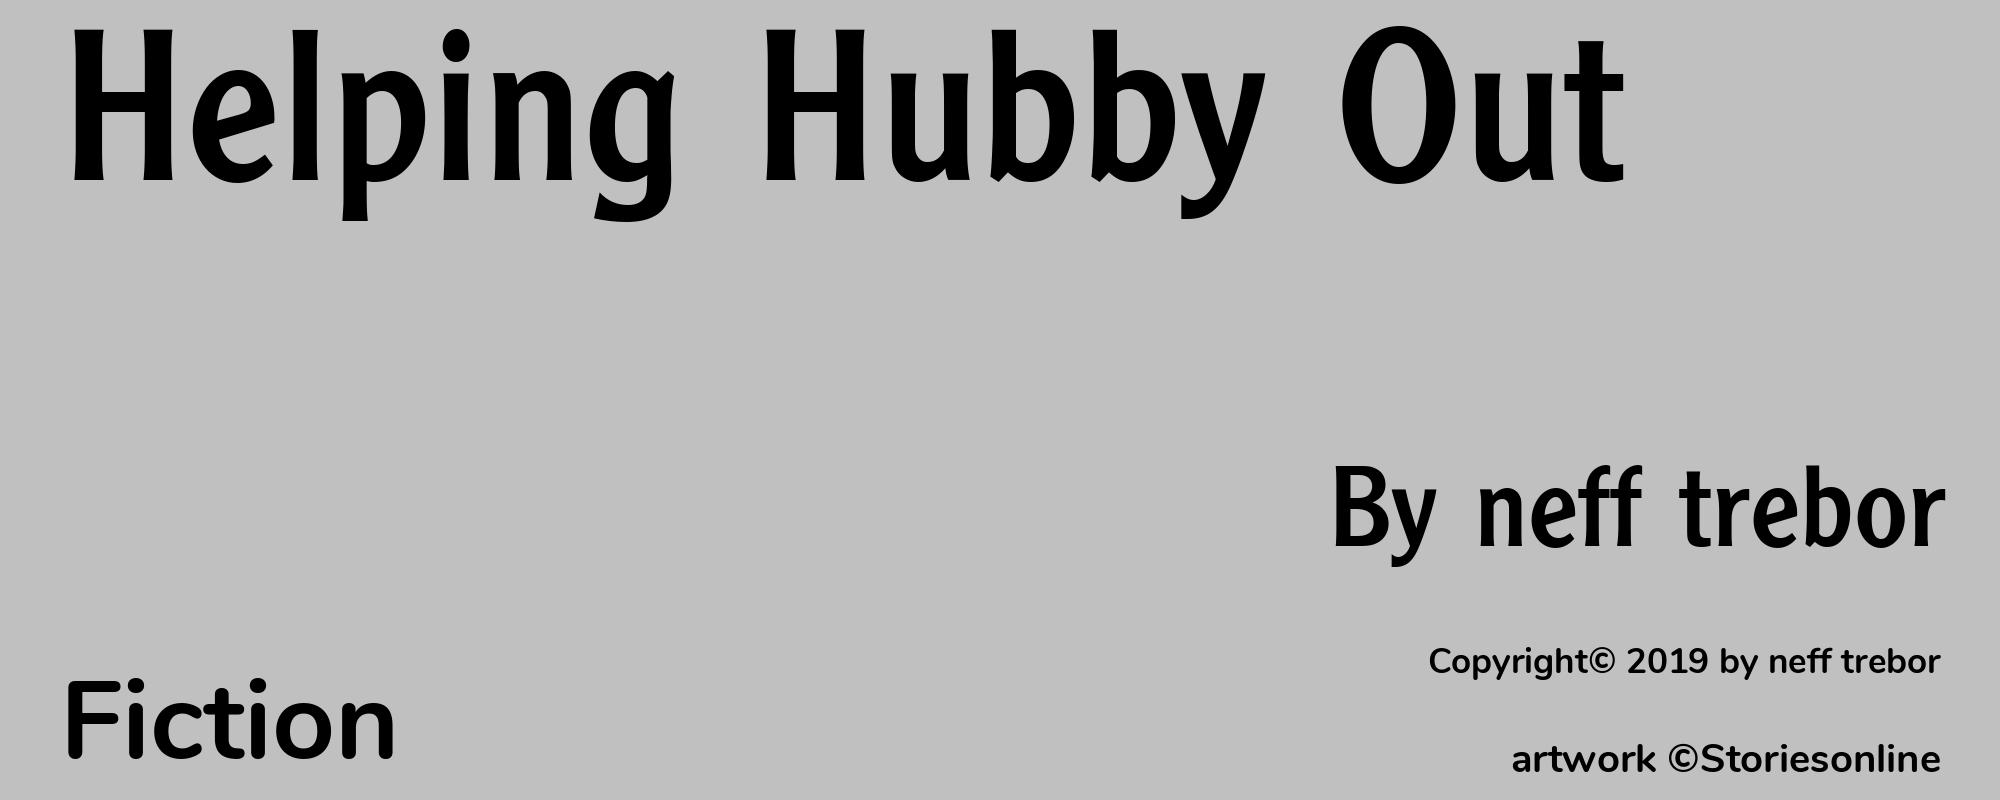 Helping Hubby Out - Cover